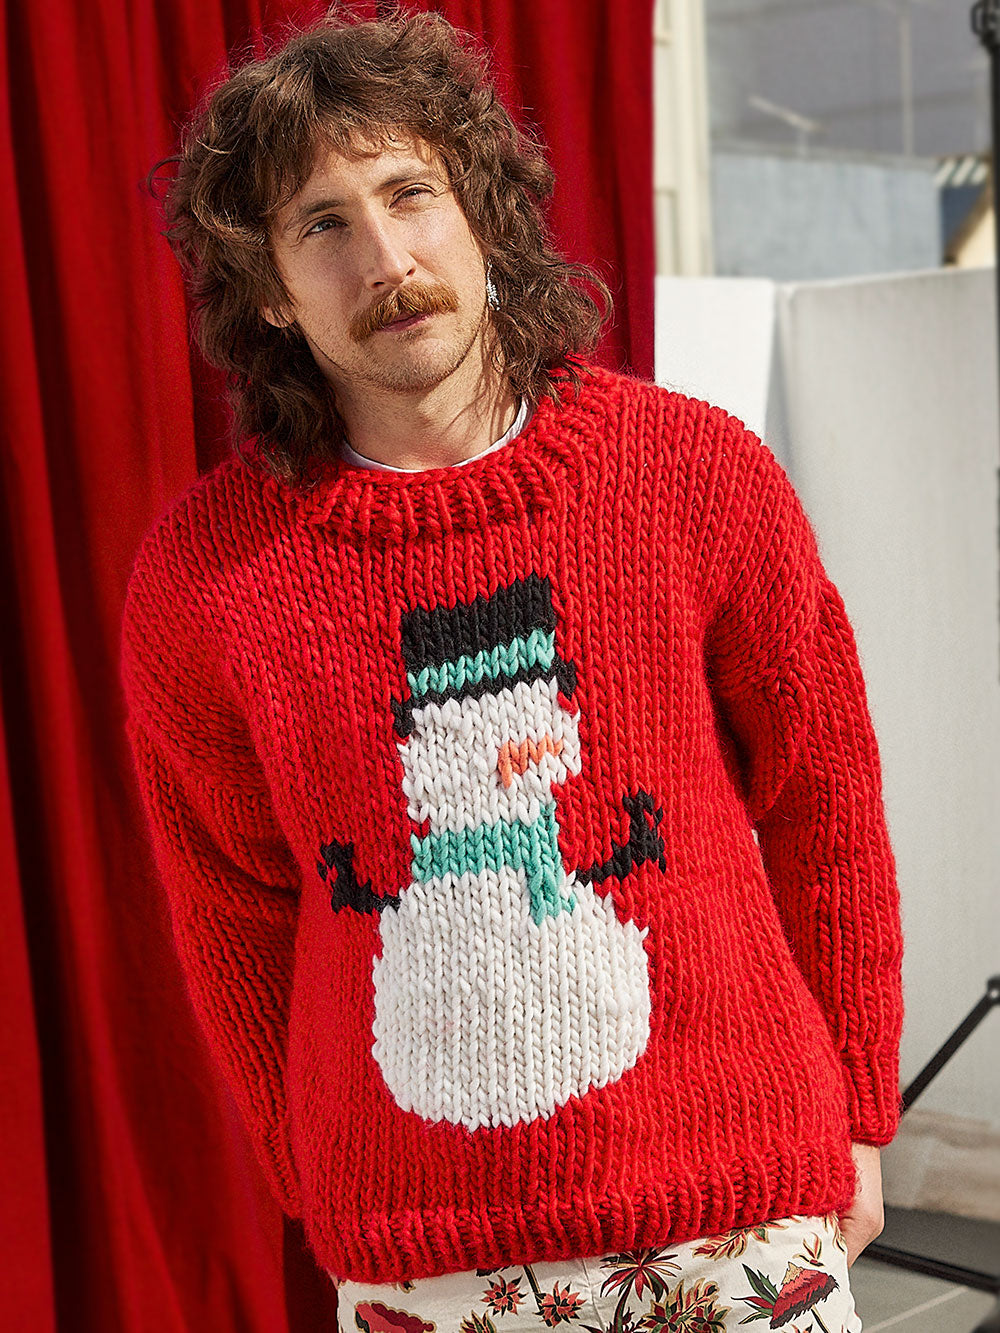 Knit your own Snowman Christmas Sweater with Cardigang